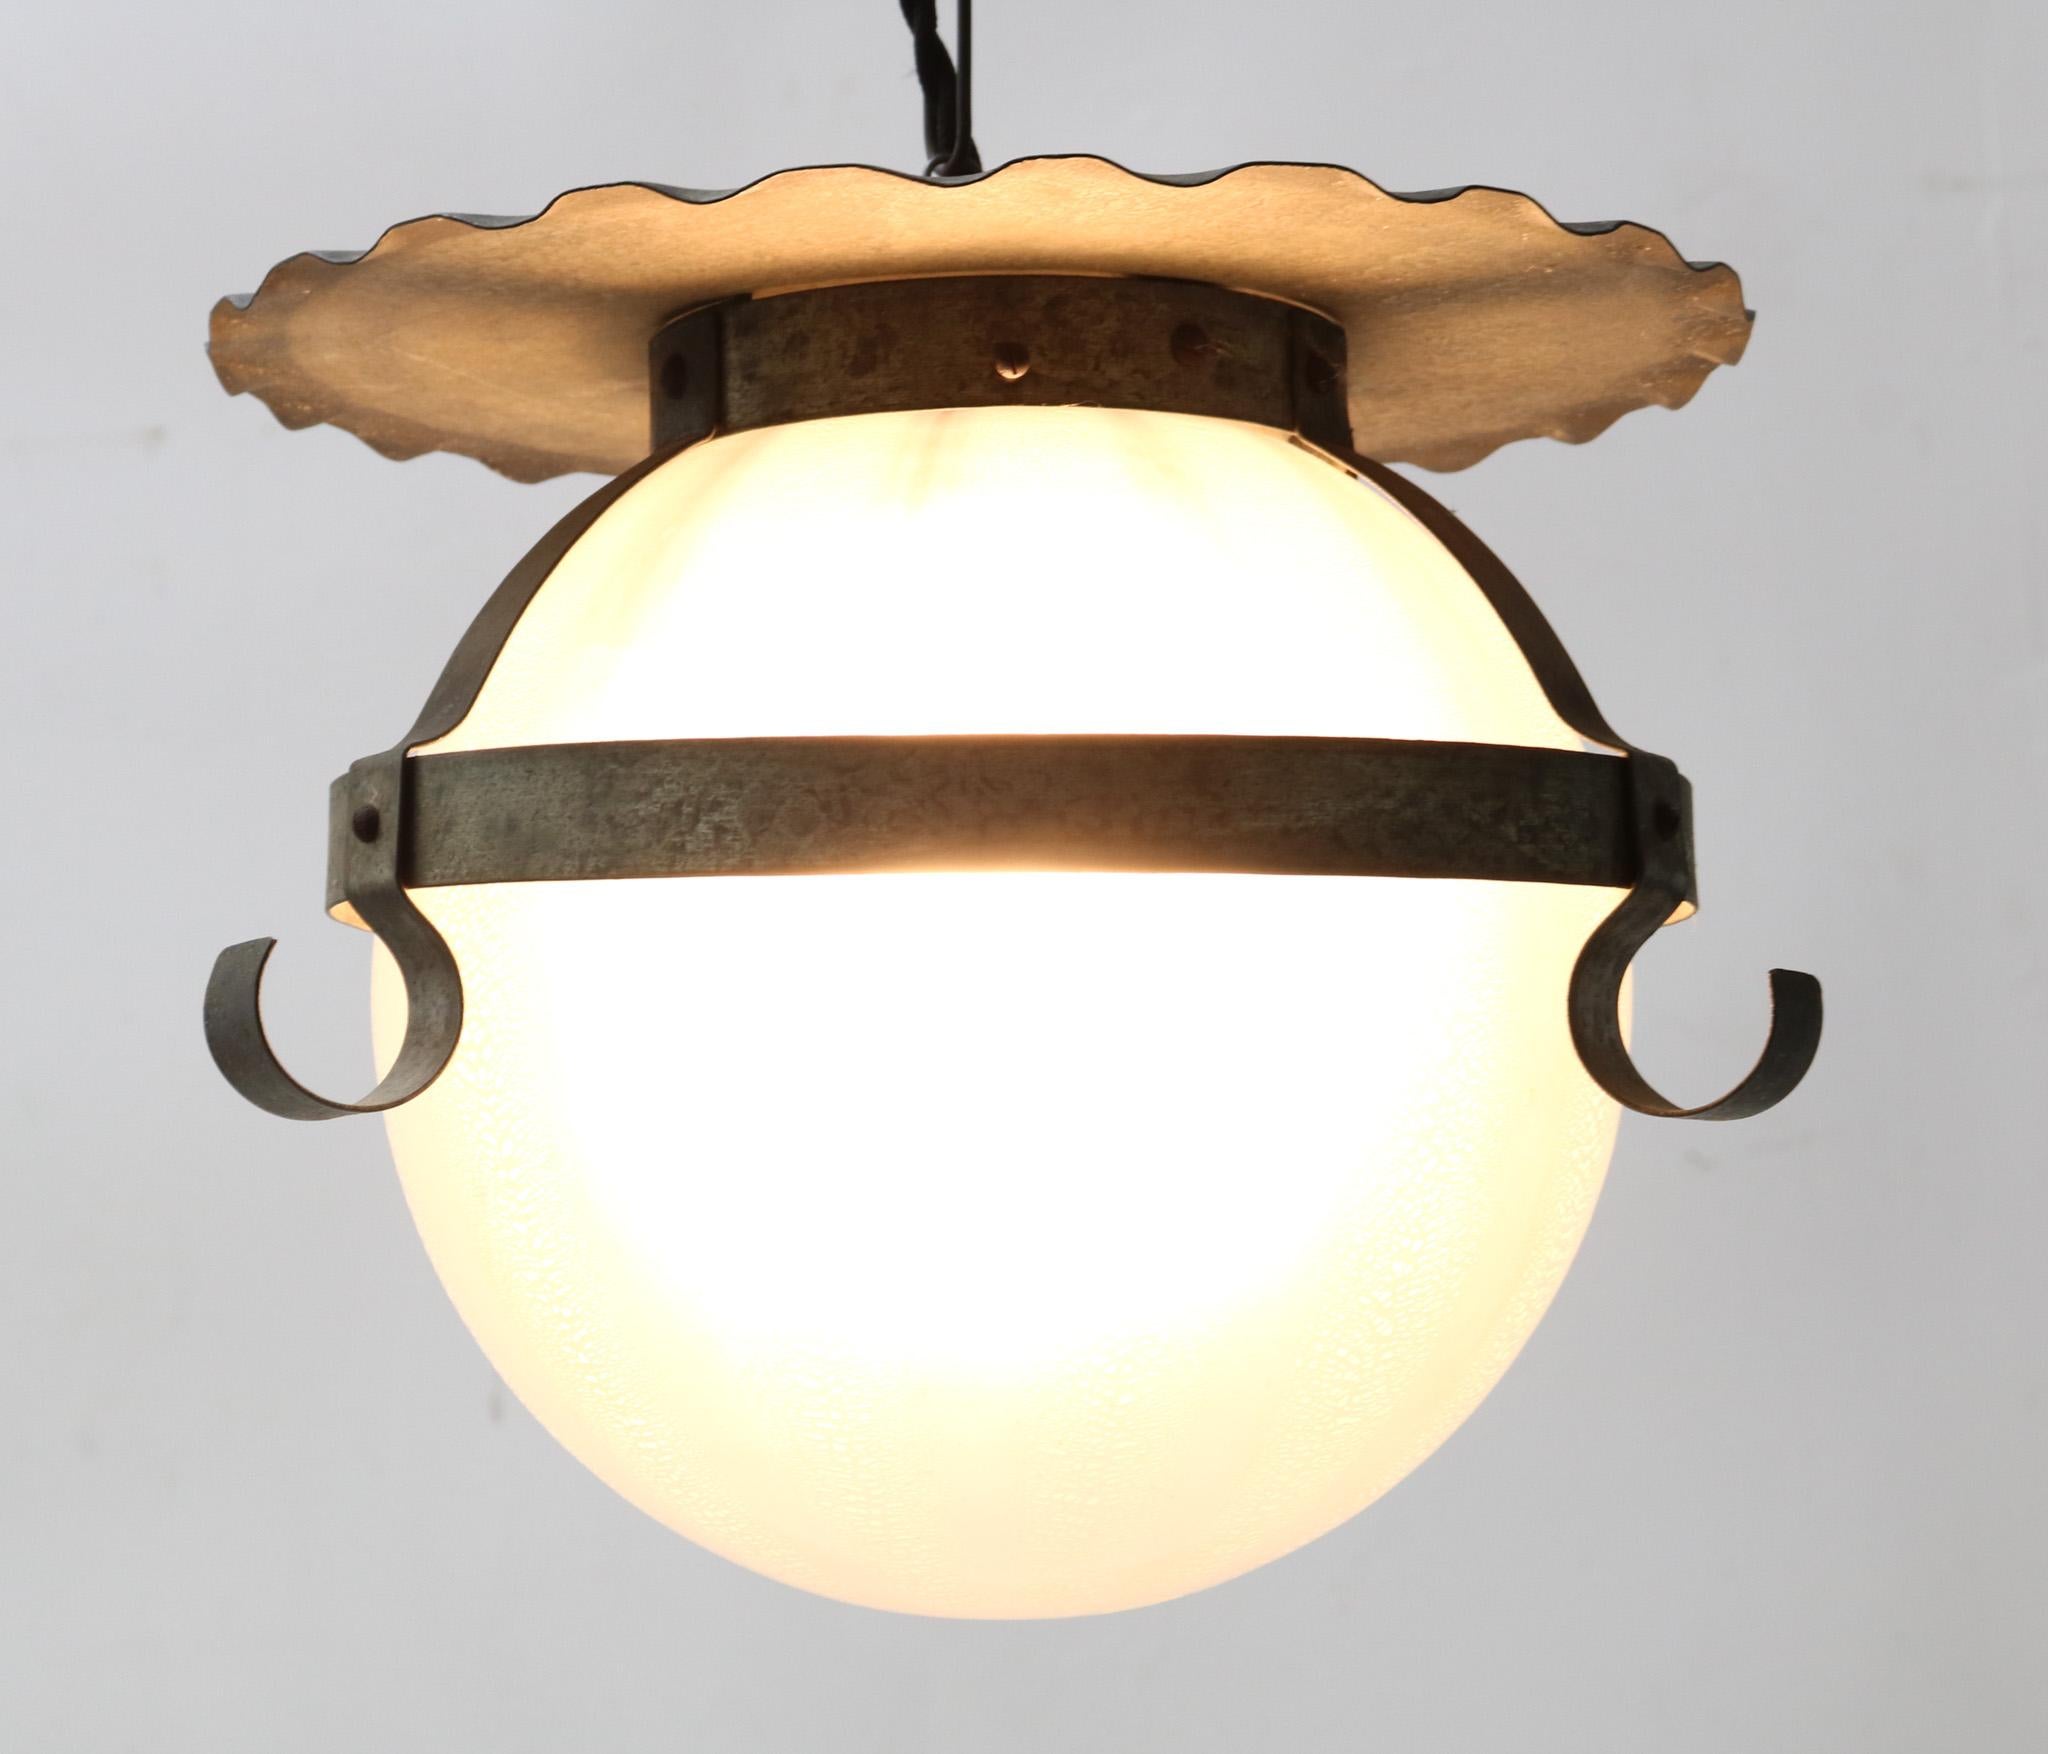 Wrought Iron and Glass Art Deco Amsterdamse School Pendant Lamp by A.D. Copier  For Sale 3